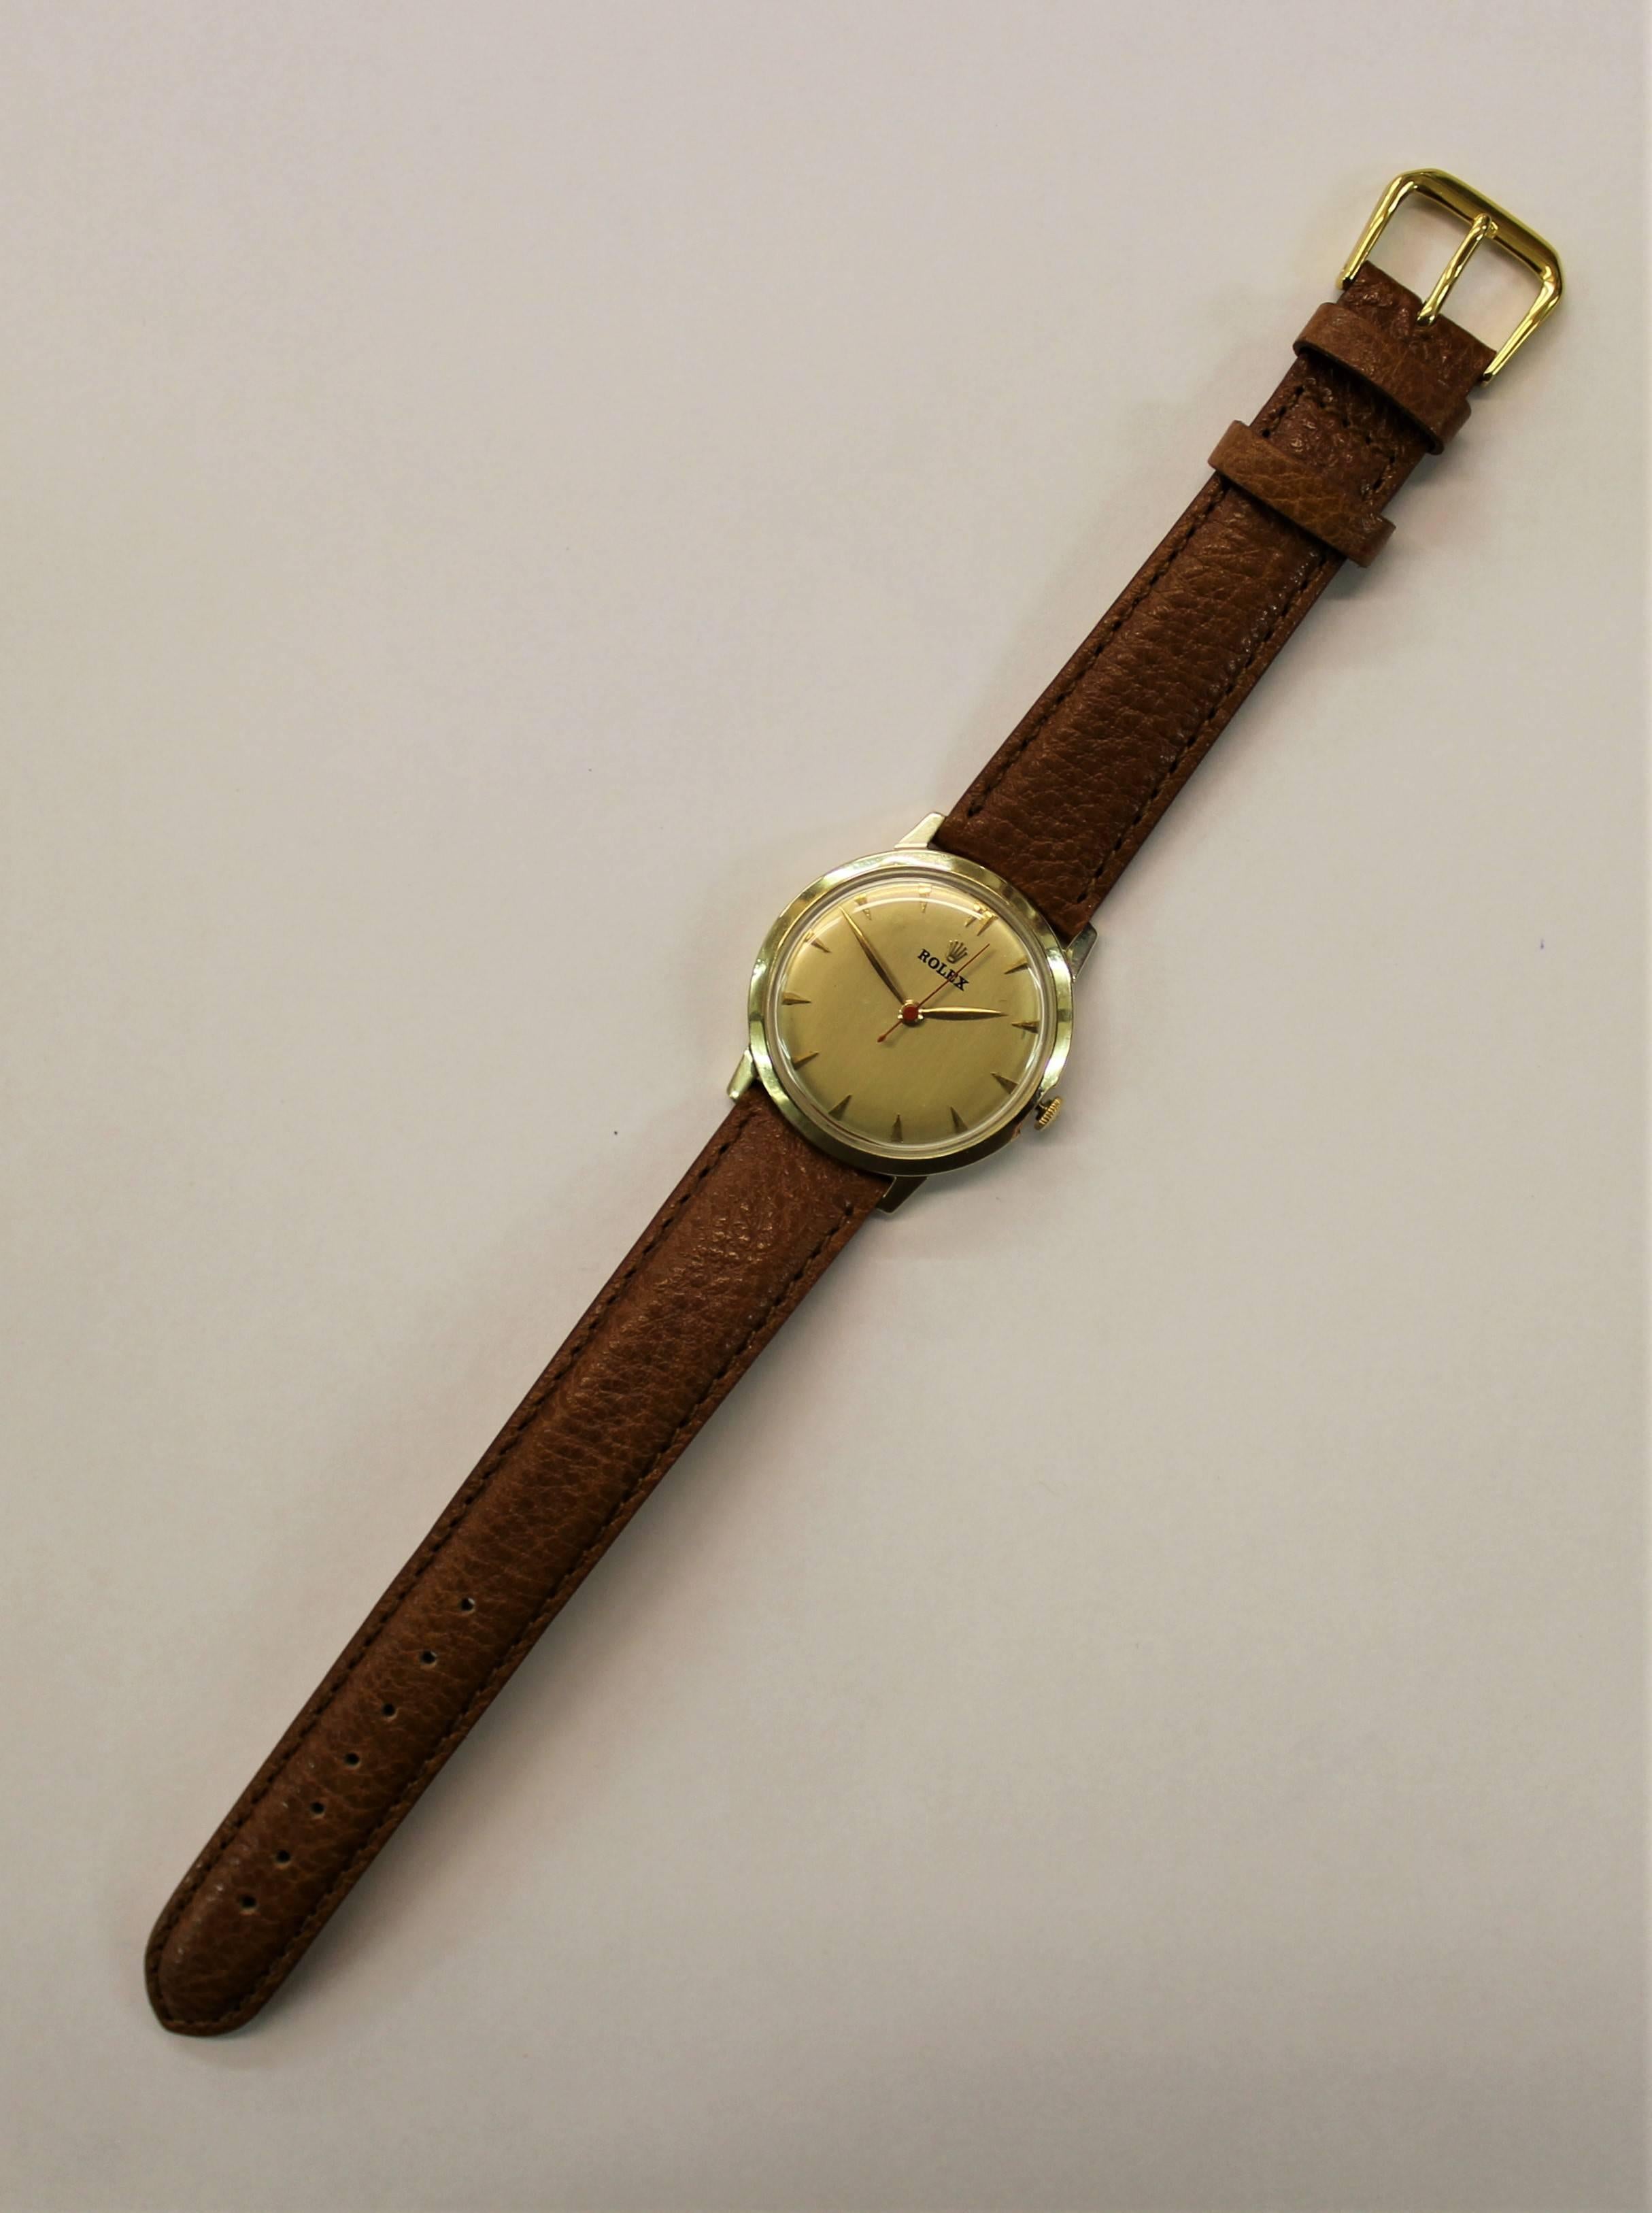 14-karat yellow gold Montres Rolex Geneva Swiss watch with a genuine calfskin leather strap, circa 1945.
-17 jewels
-Model number 1210
- Weight of case 10.8 grams
-Measure: Case diameter 33 mm
-Crown size 4.2 mm
-Height 9.5 mm
-Serial number